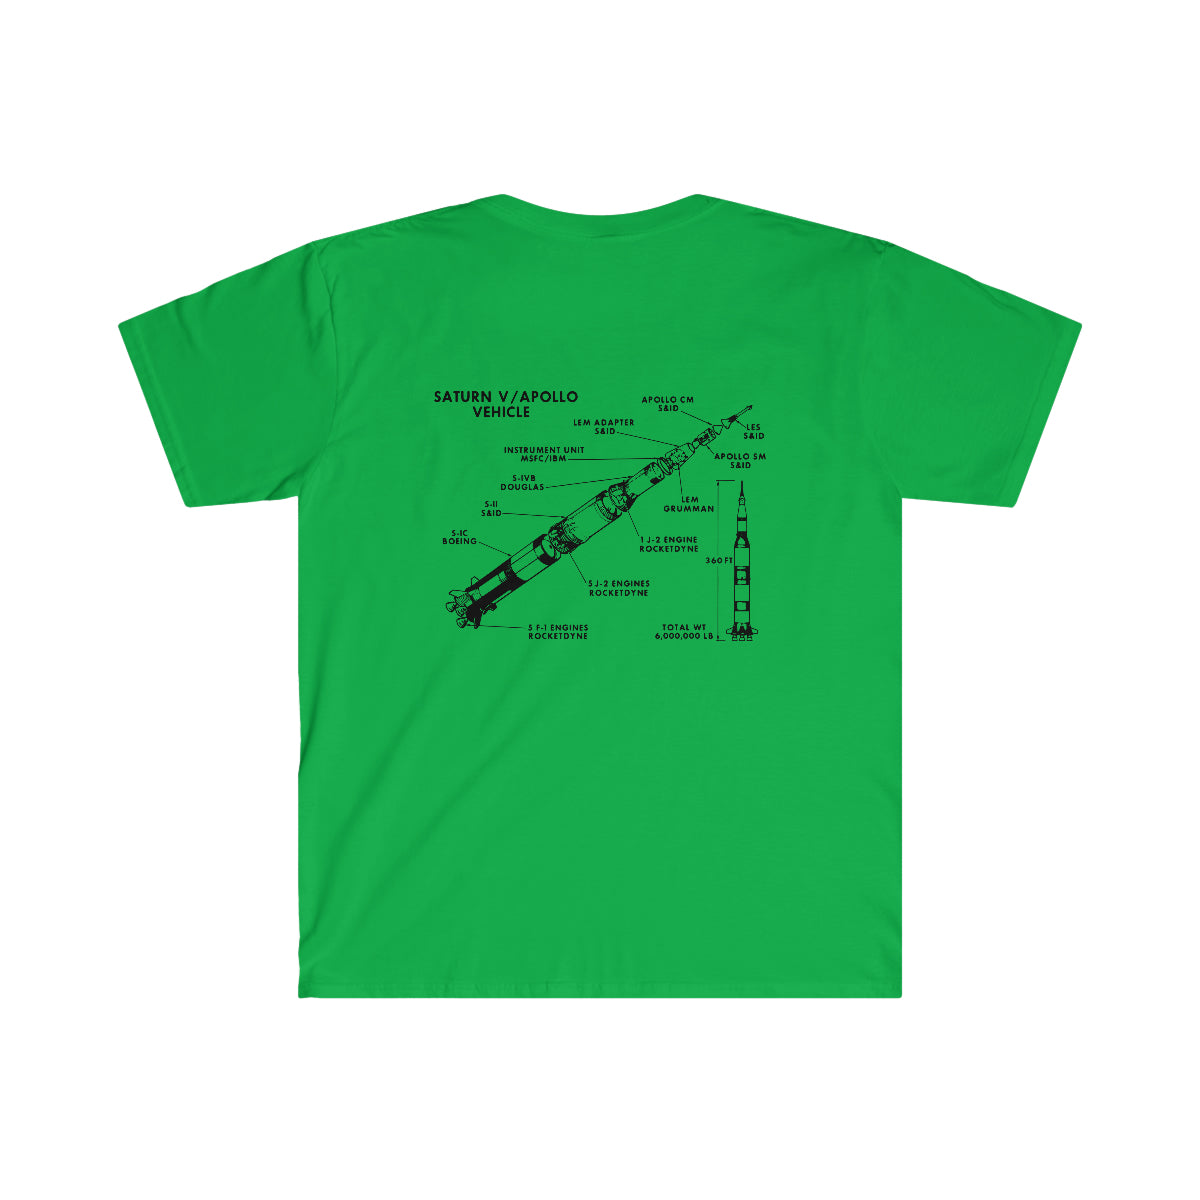 A green Saturn / Apollo Vehicle T-Shirt with a Saturn diagram on it.